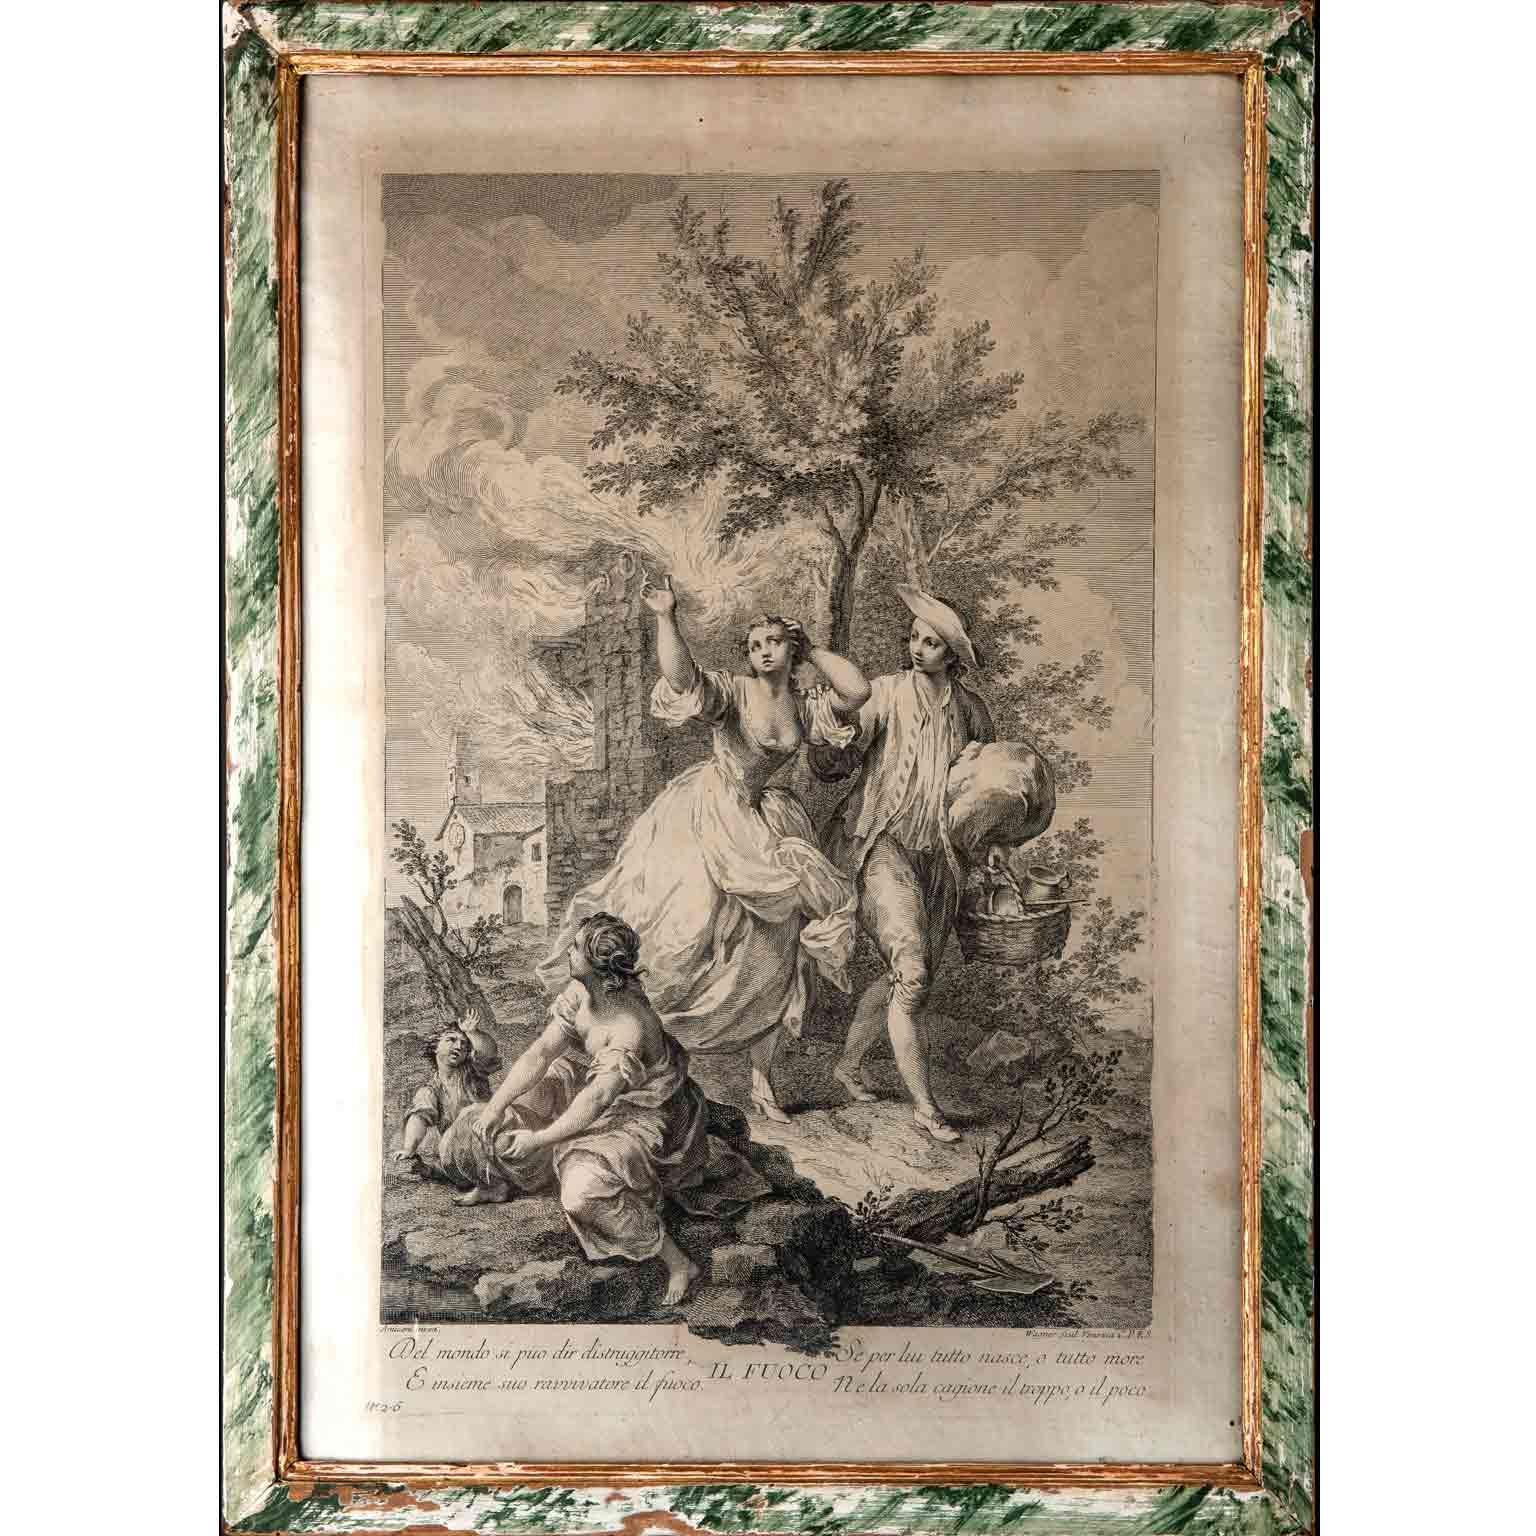 Etched Amigoni Set of Four Italian Engravings circa 1730 Four Elements Allegory Framed